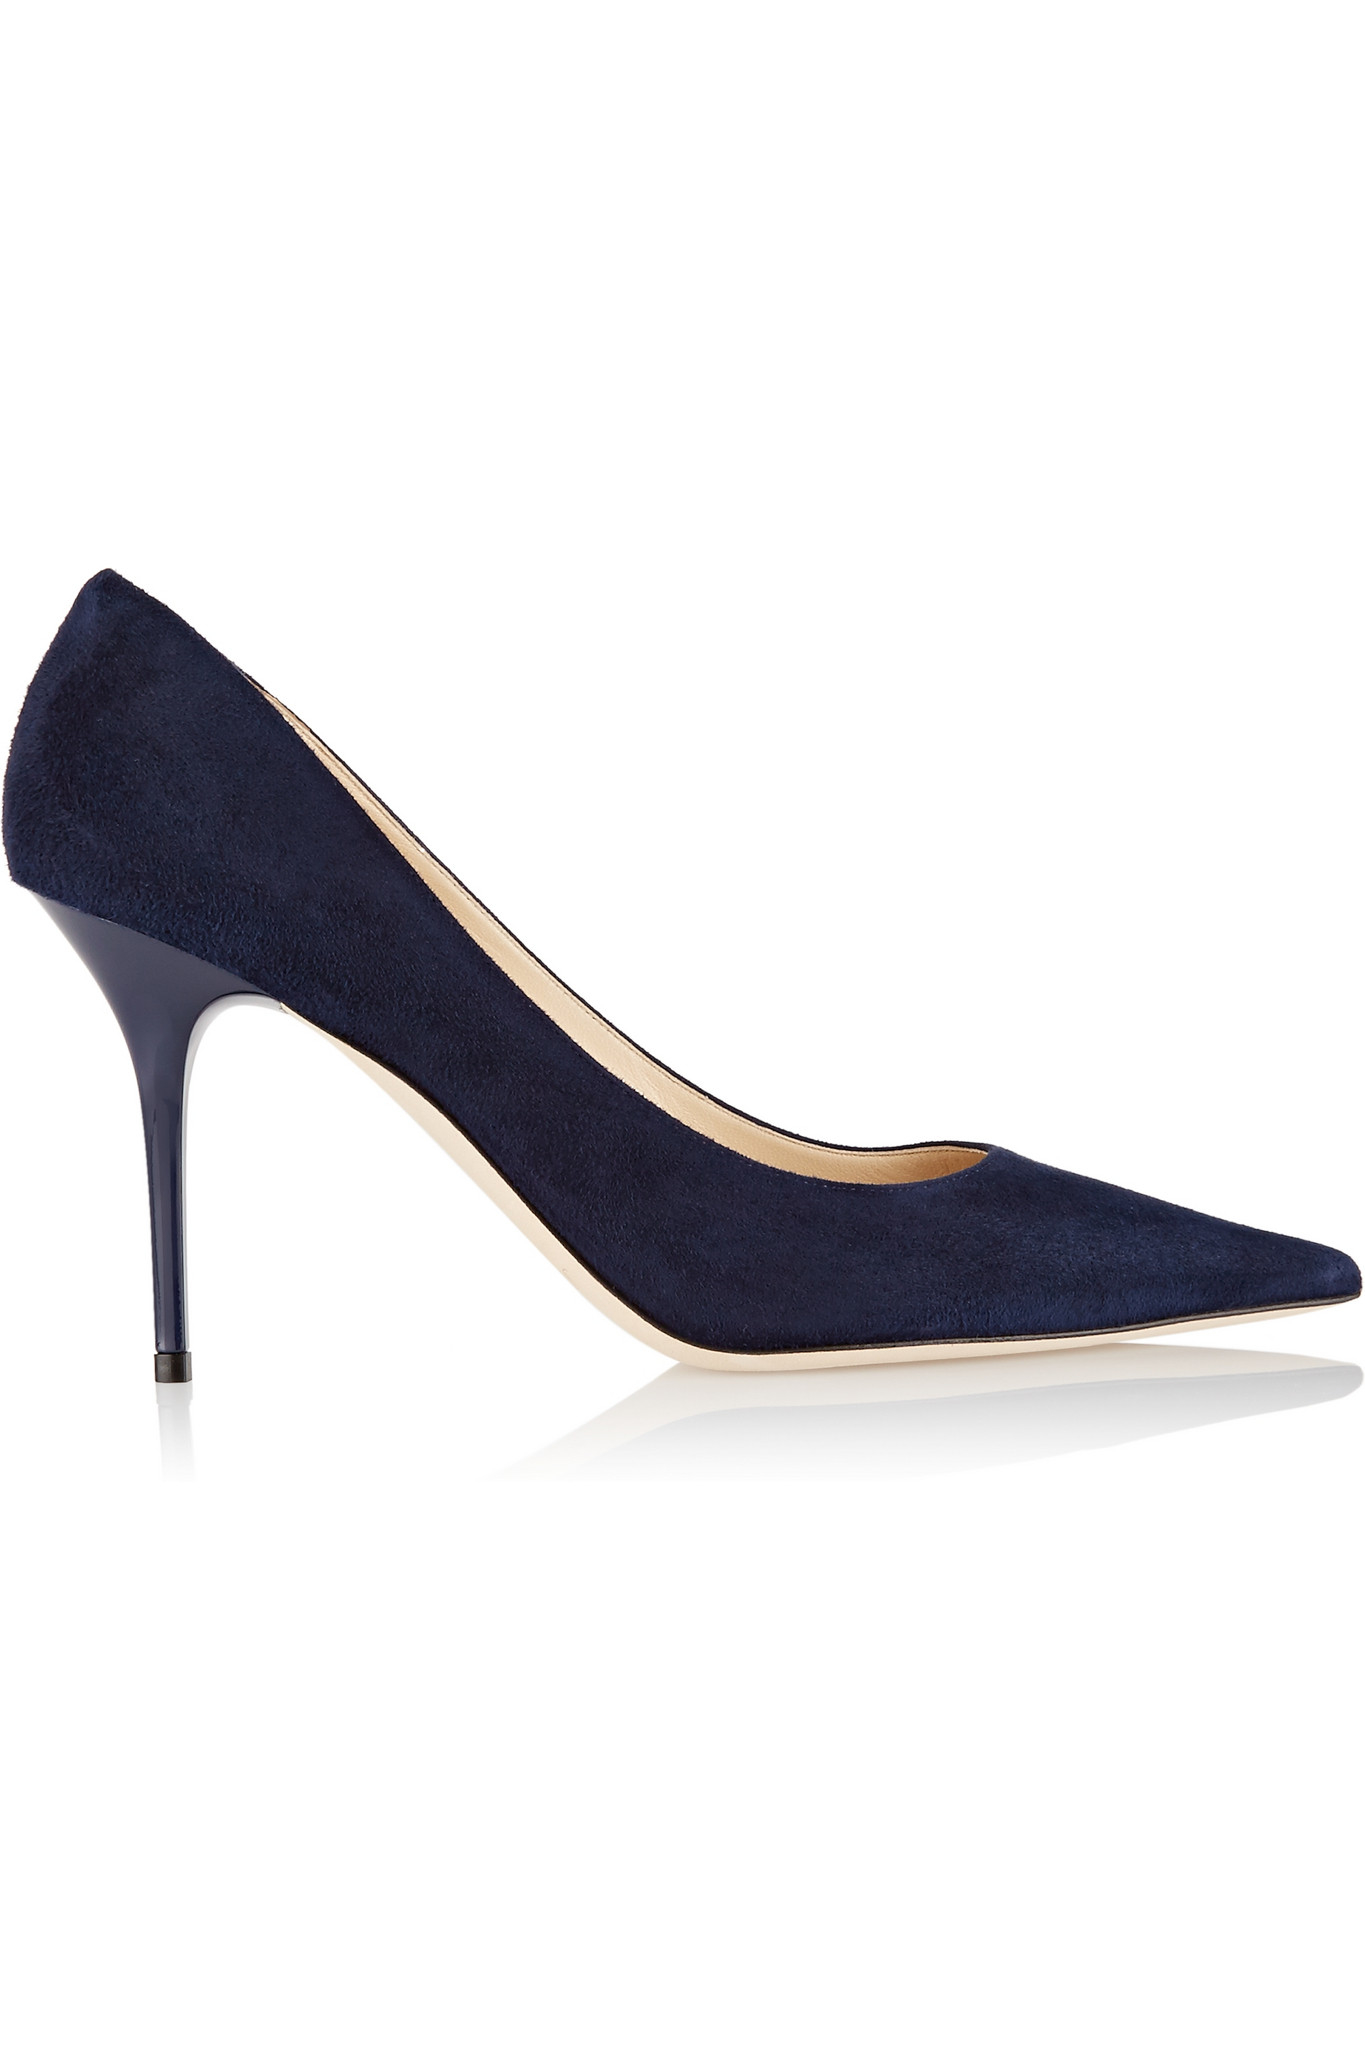 Lyst - Jimmy Choo Agnes Suede Pumps in Blue